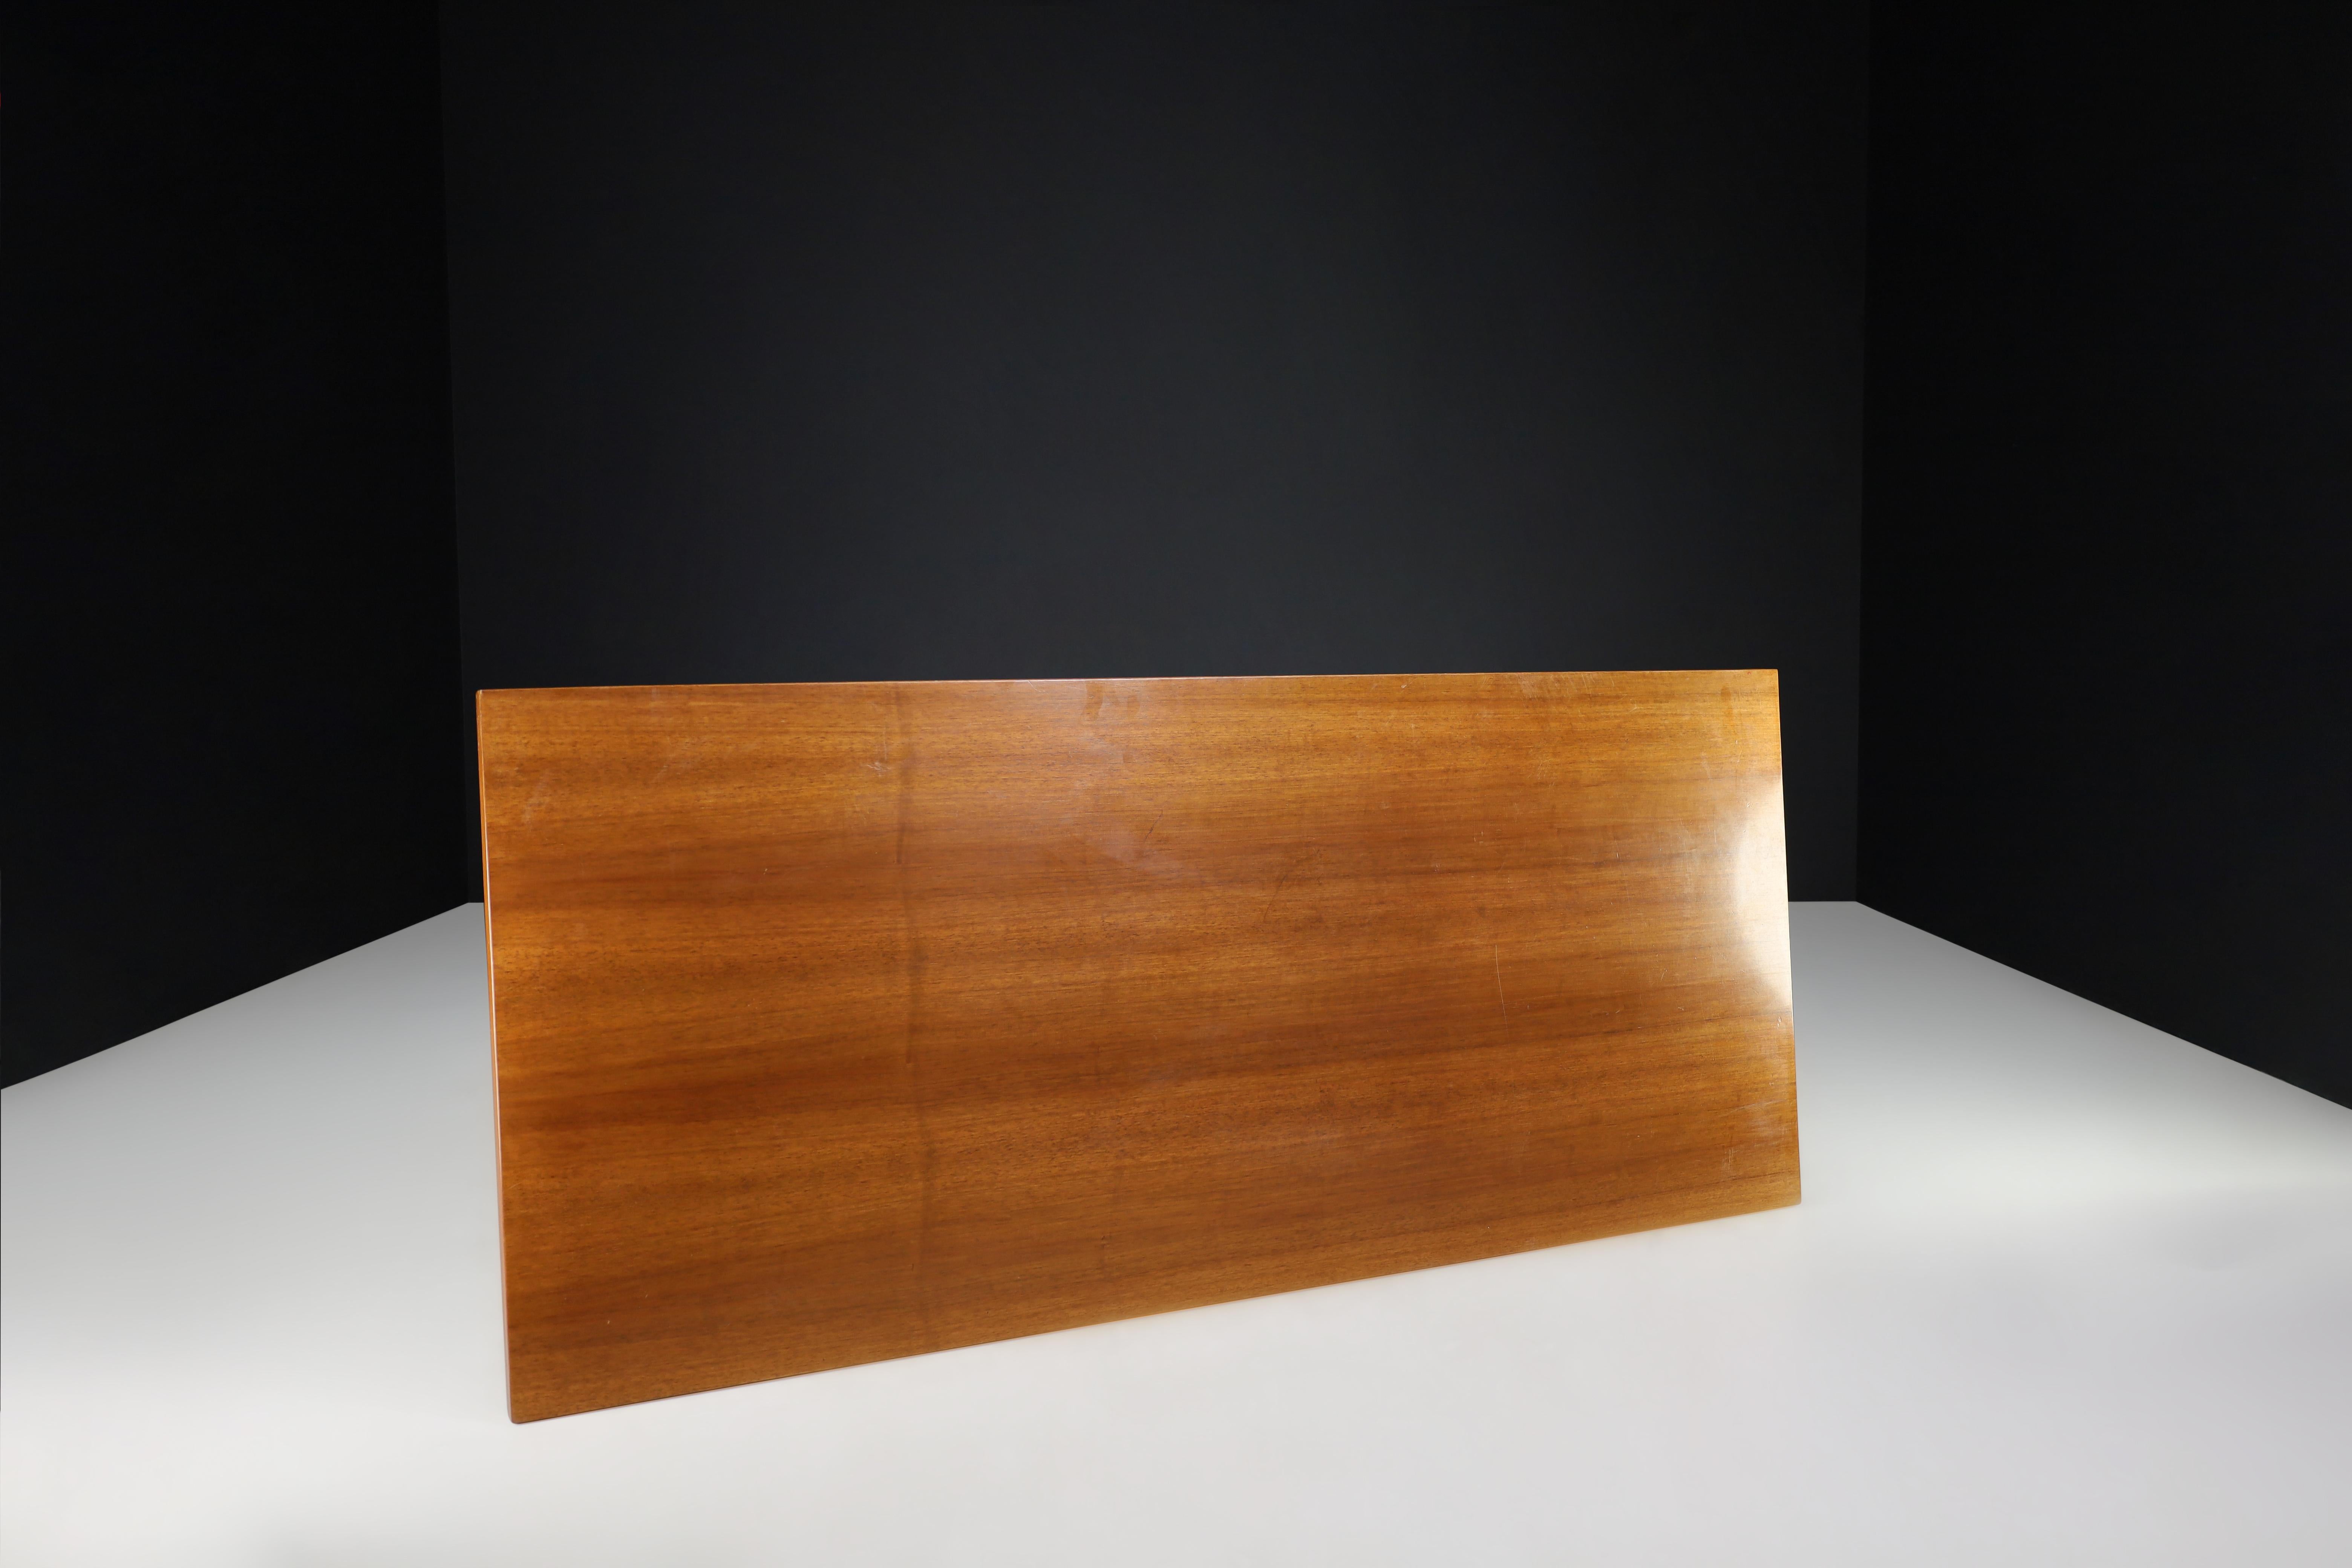 Mid-Century Modern Giovanni Michelucci Walnut Dining Room Table for Poltronova, Italy, 1964 For Sale